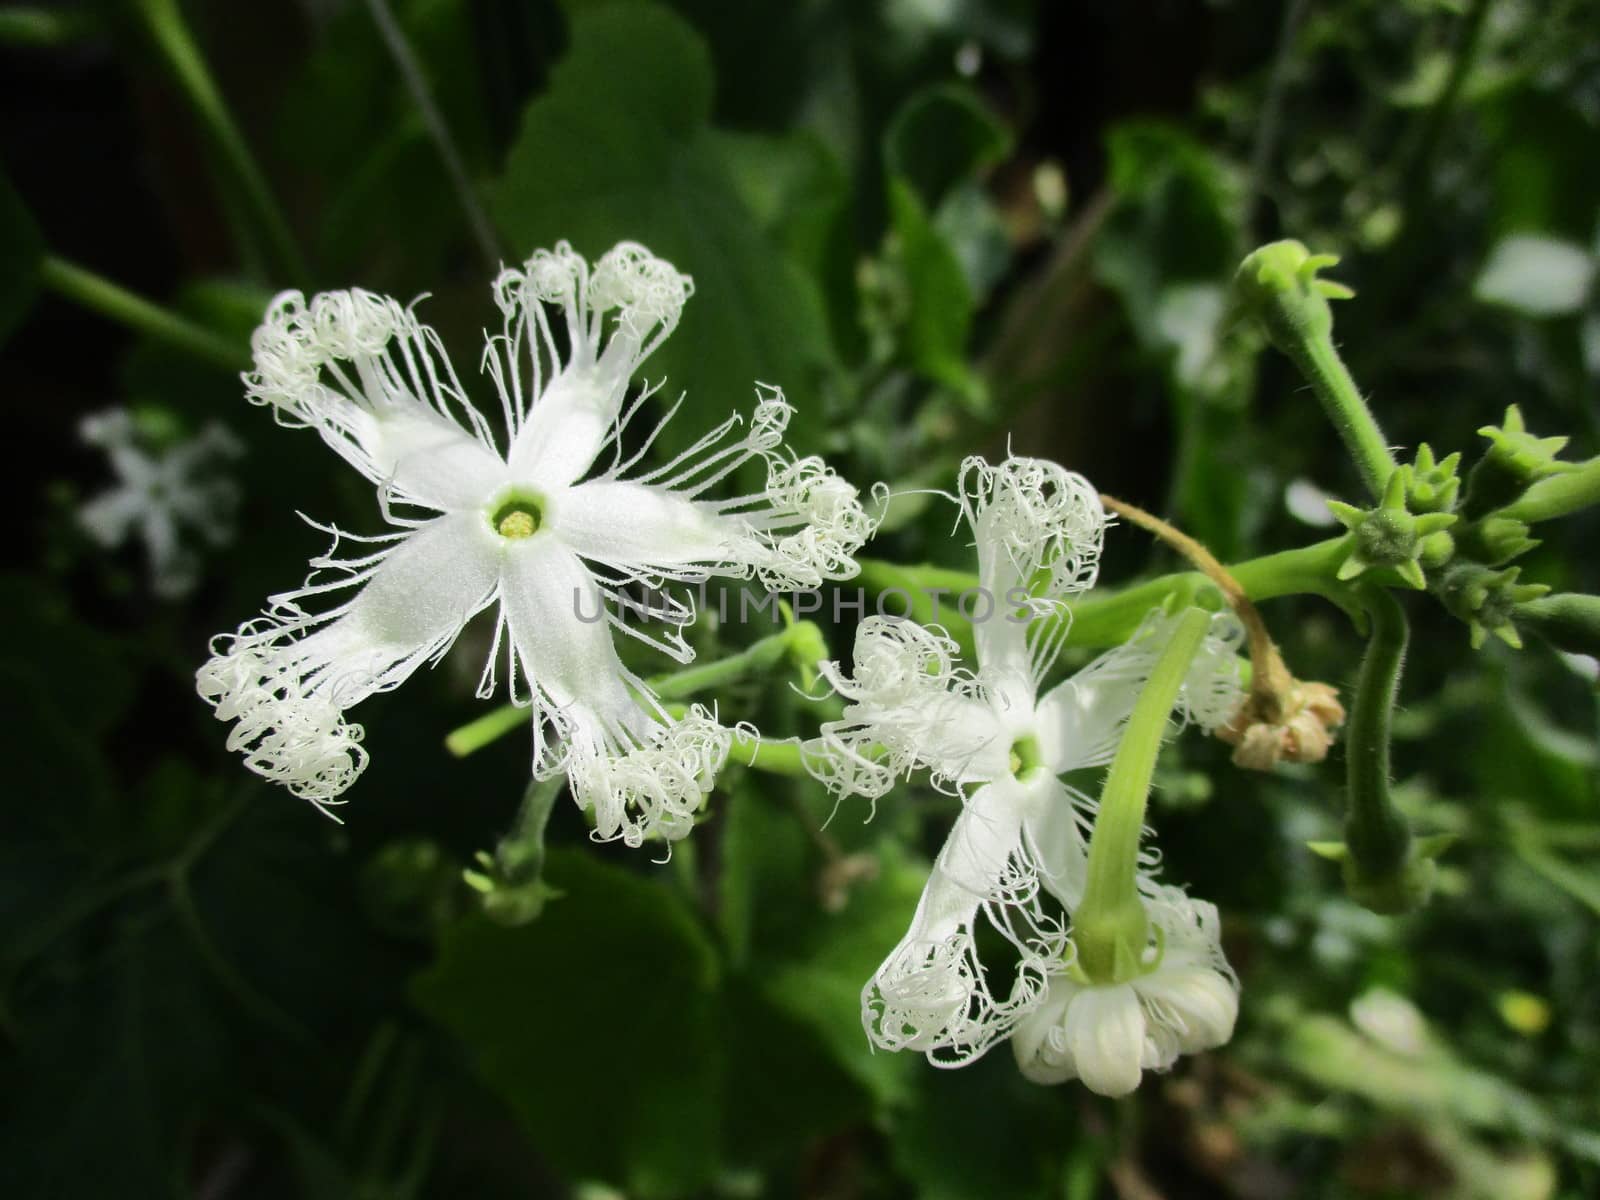 Unique white flower of Exotic tropical Trichosanthes cucumerina, snake gourd or serpent cucumber